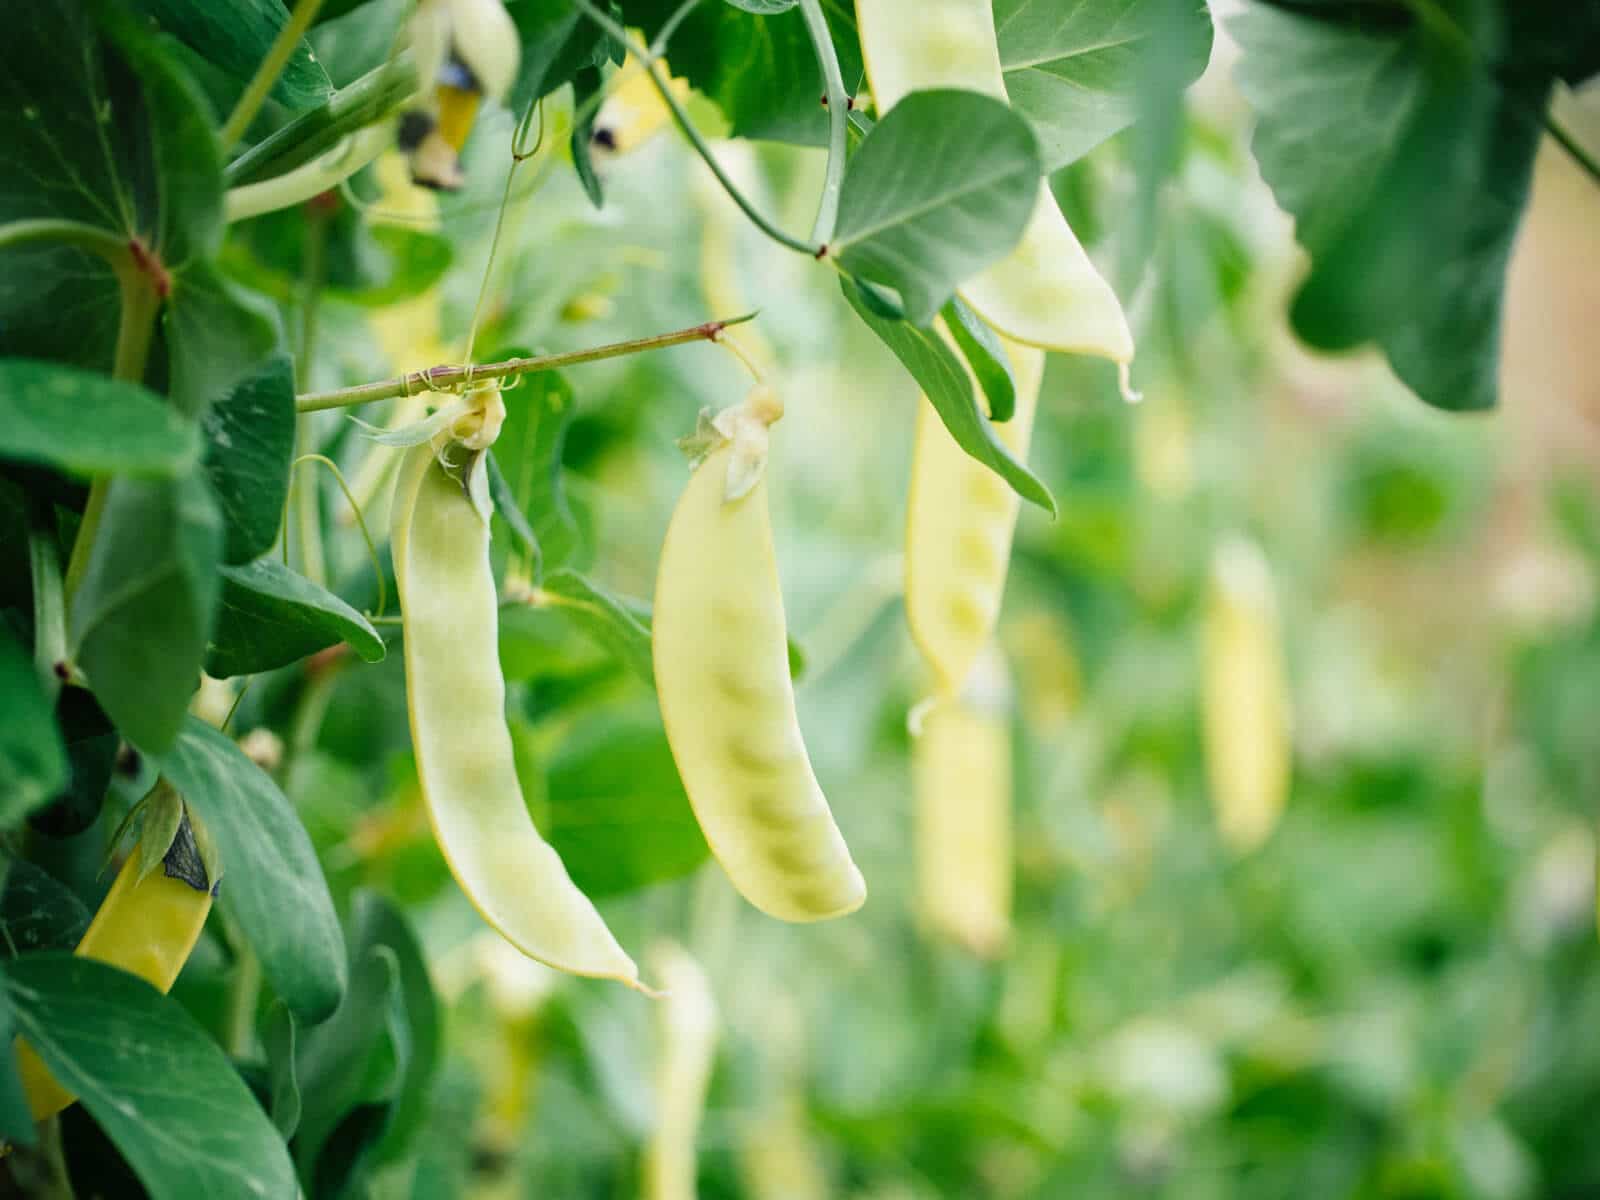 Peas and other legumes